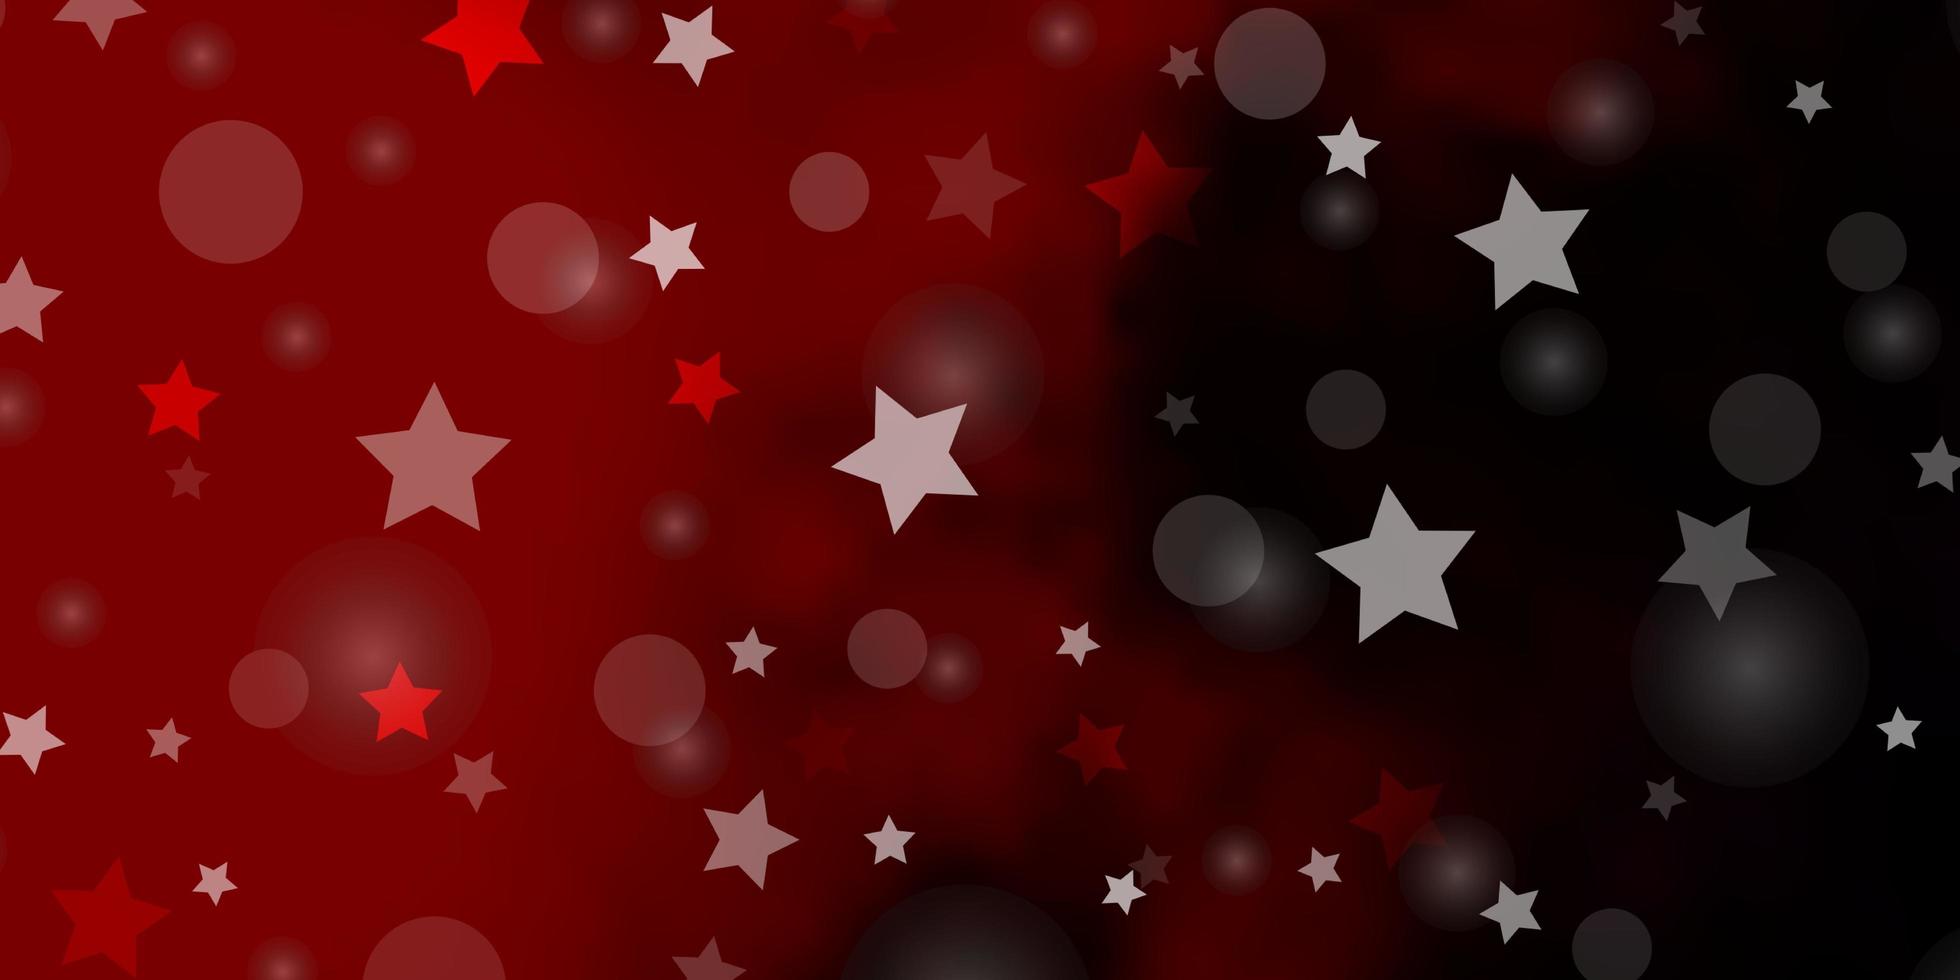 Dark Red vector pattern with circles stars